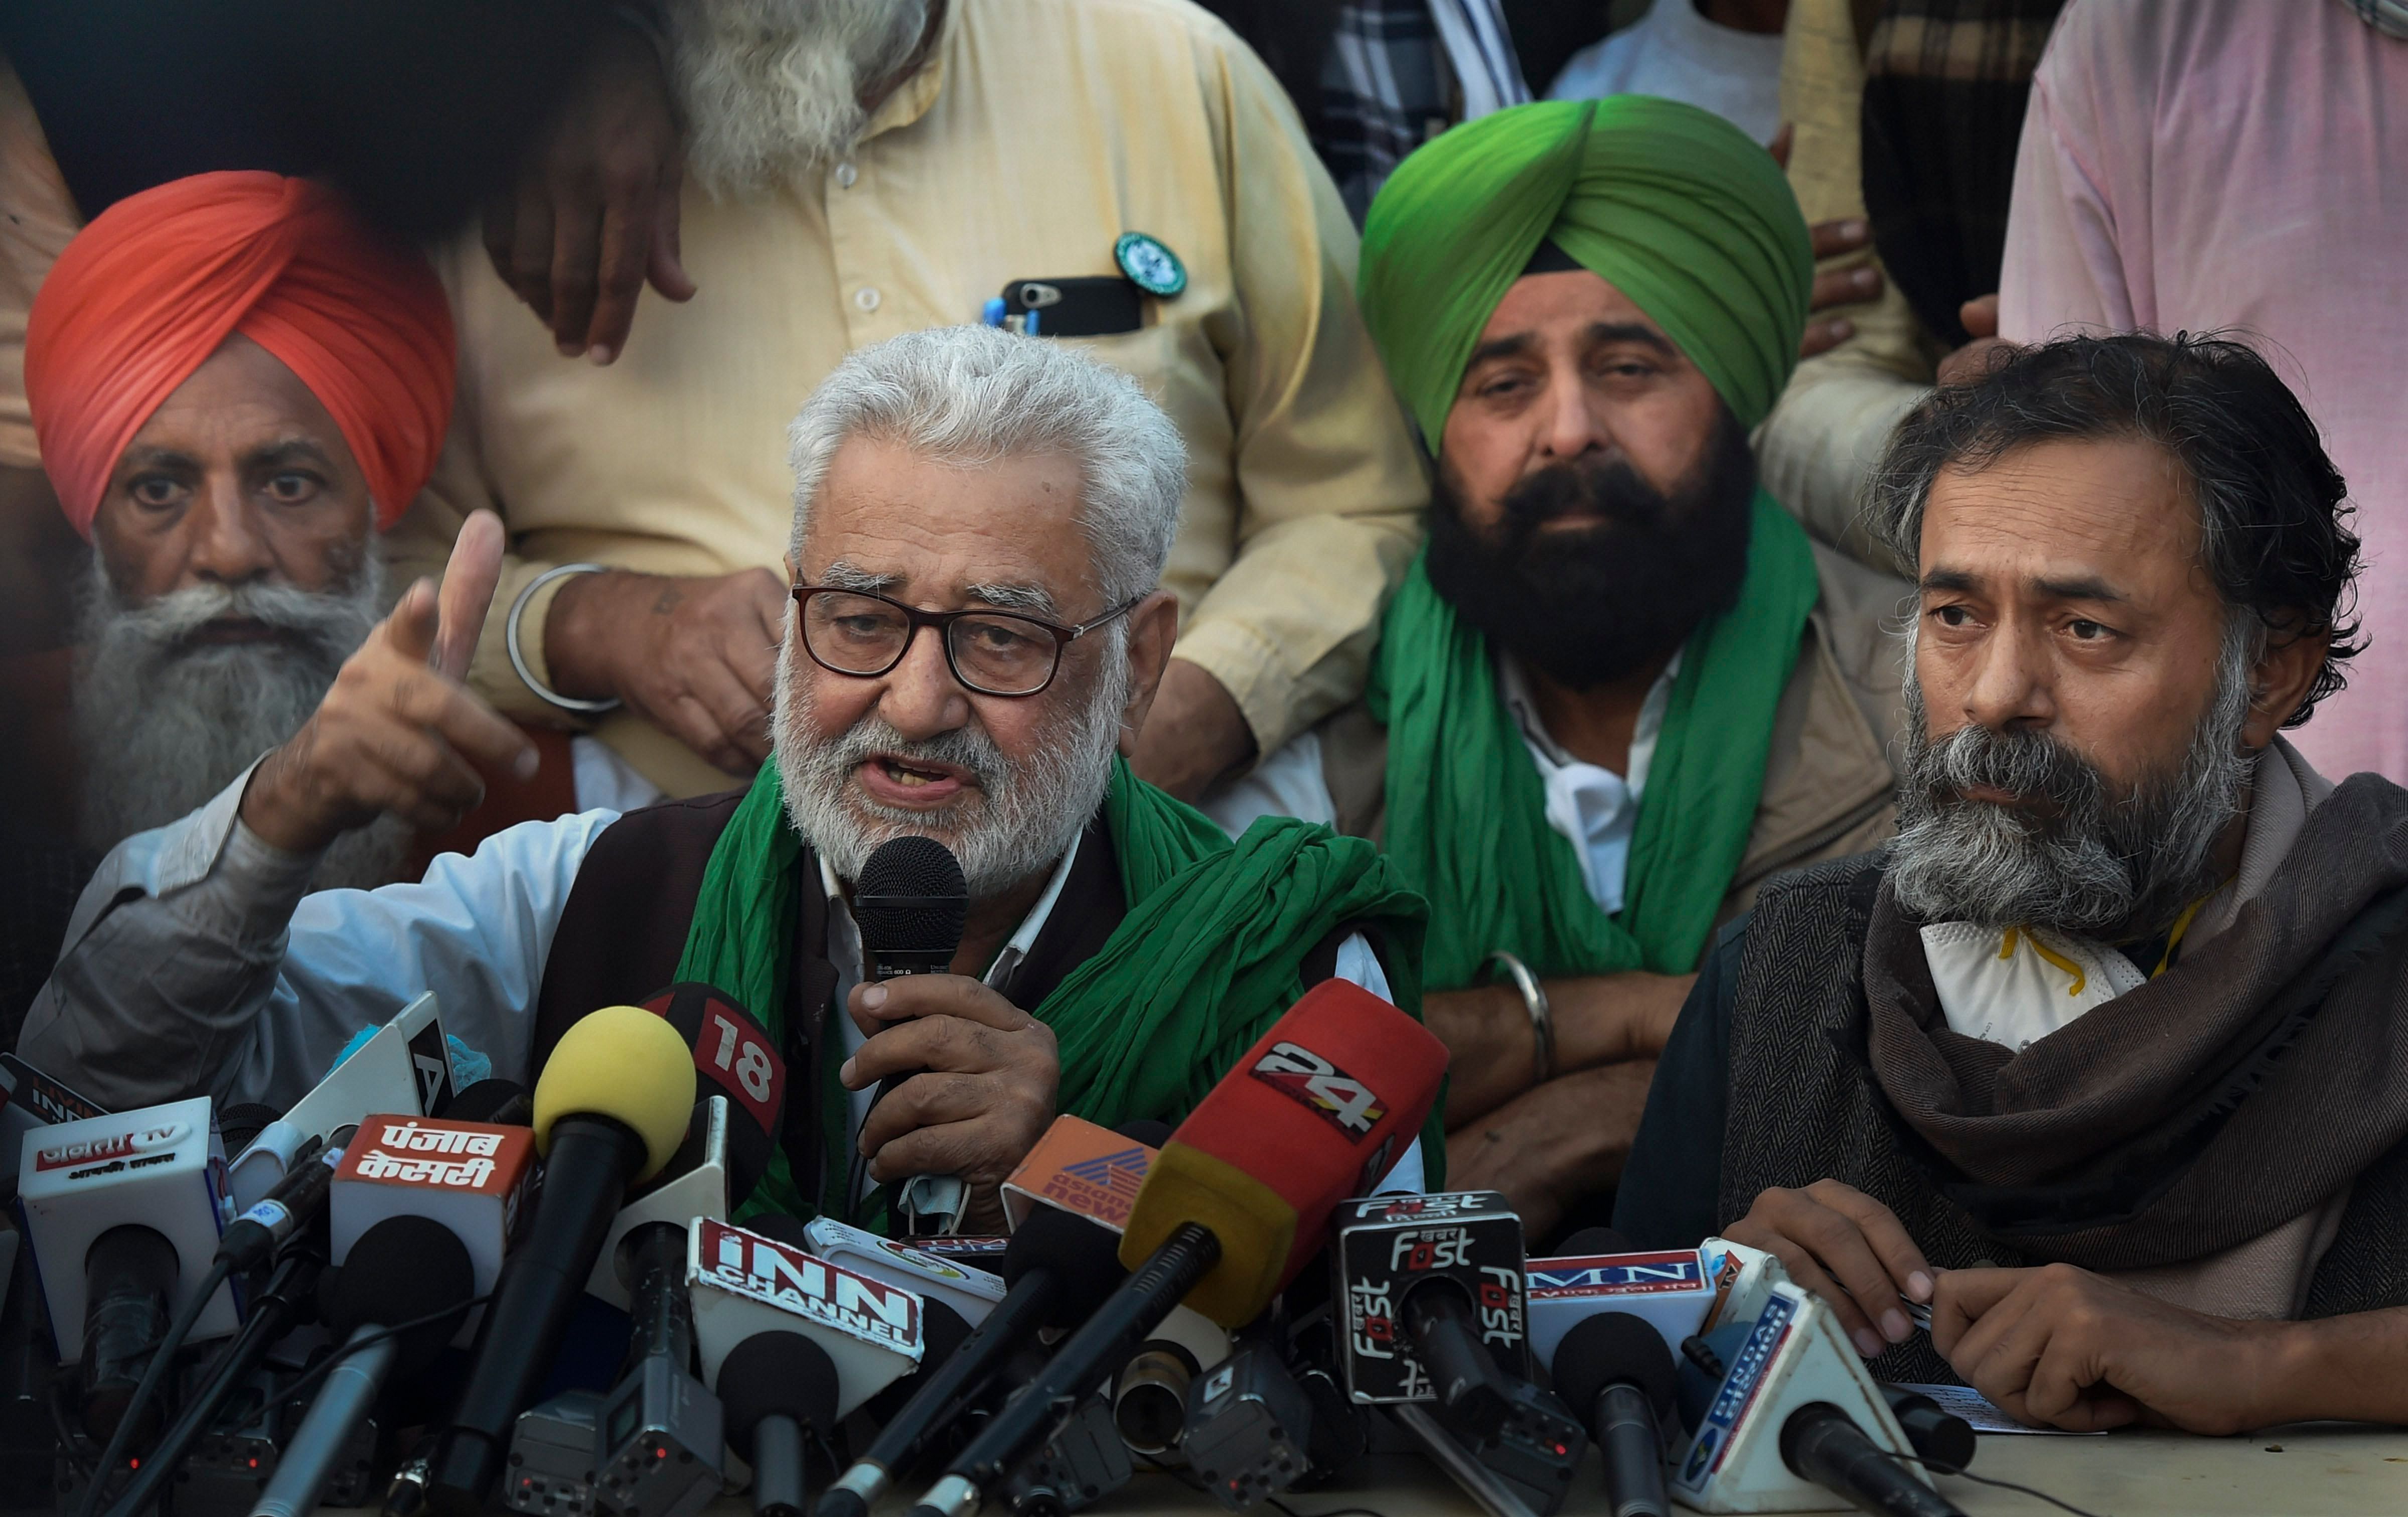 Darshan Pal, President of Krantikari Kisan Union addresses a press conference as Swaraj India President Yogendra Yadav (R) looks on during their 'Delhi Chalo' protest march against the Centre's new farm laws, at Singhu border in New Delhi, Wednesday, Dec. 2, 2020. Credit: PTI Photo